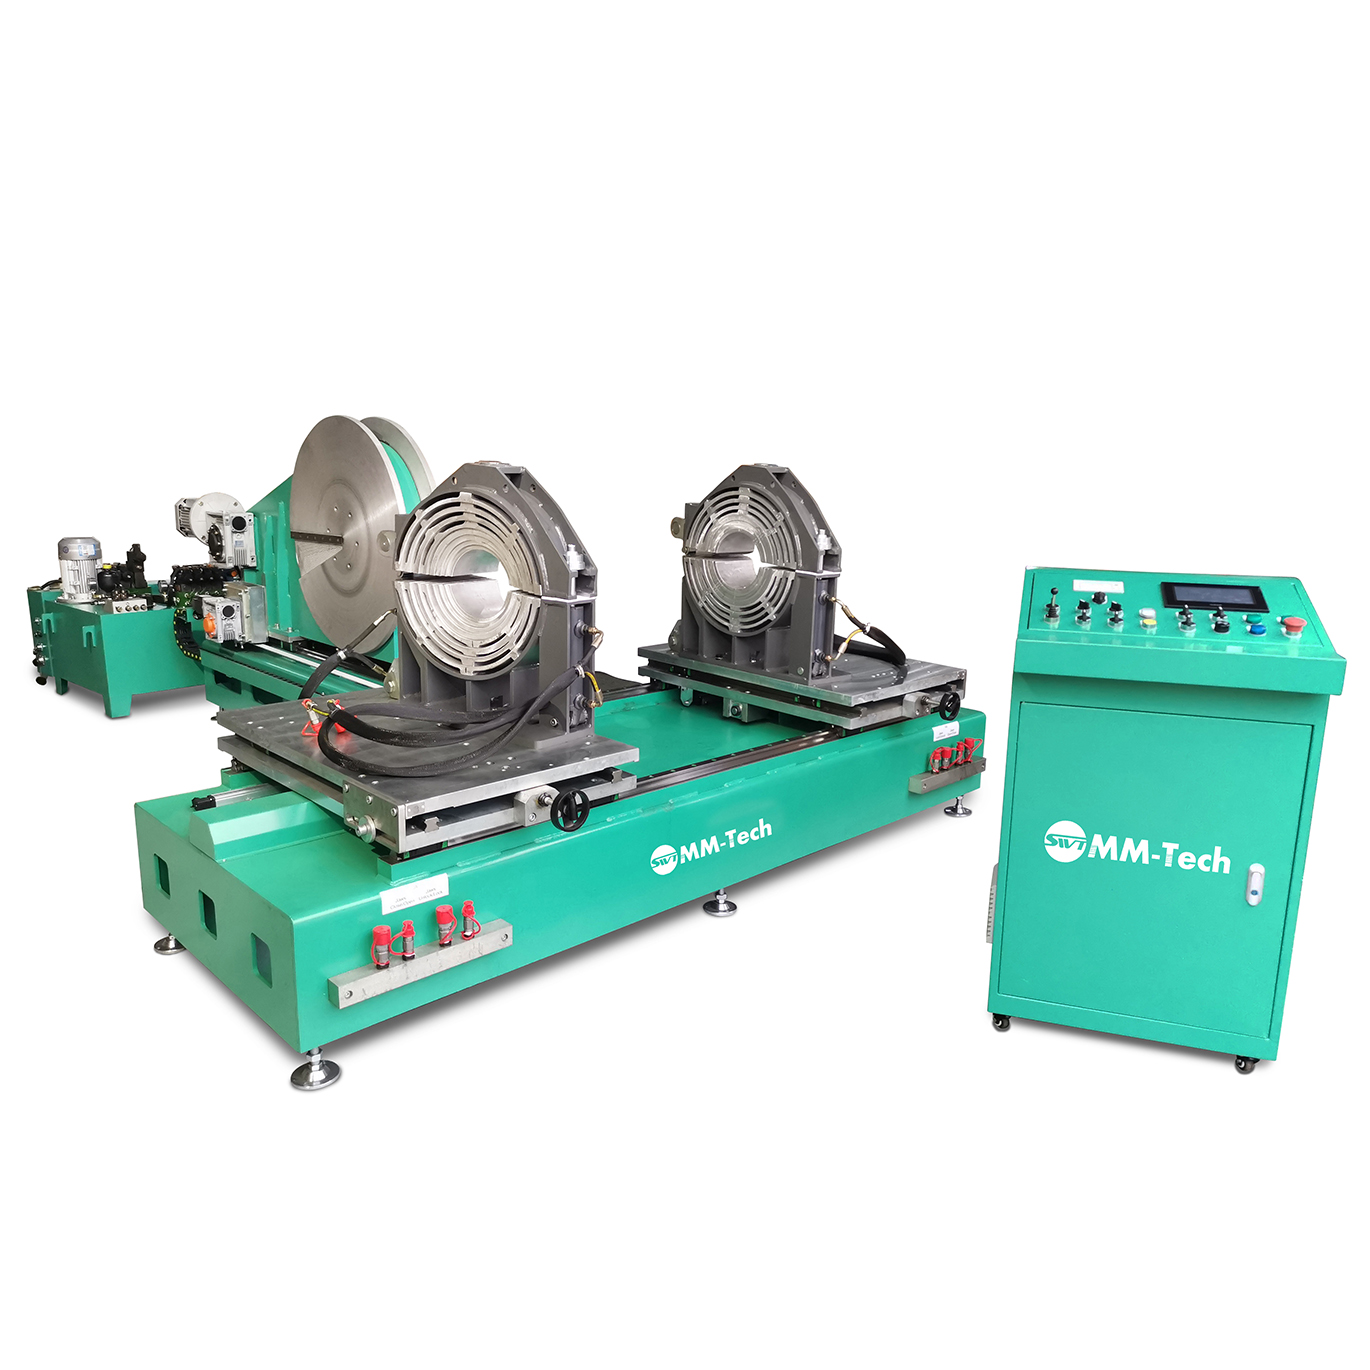 Swt-Ma630 Hdpe Fittings Fabrication Machine For Making Elbow Tee Cross Hdpe Pipe Fittings